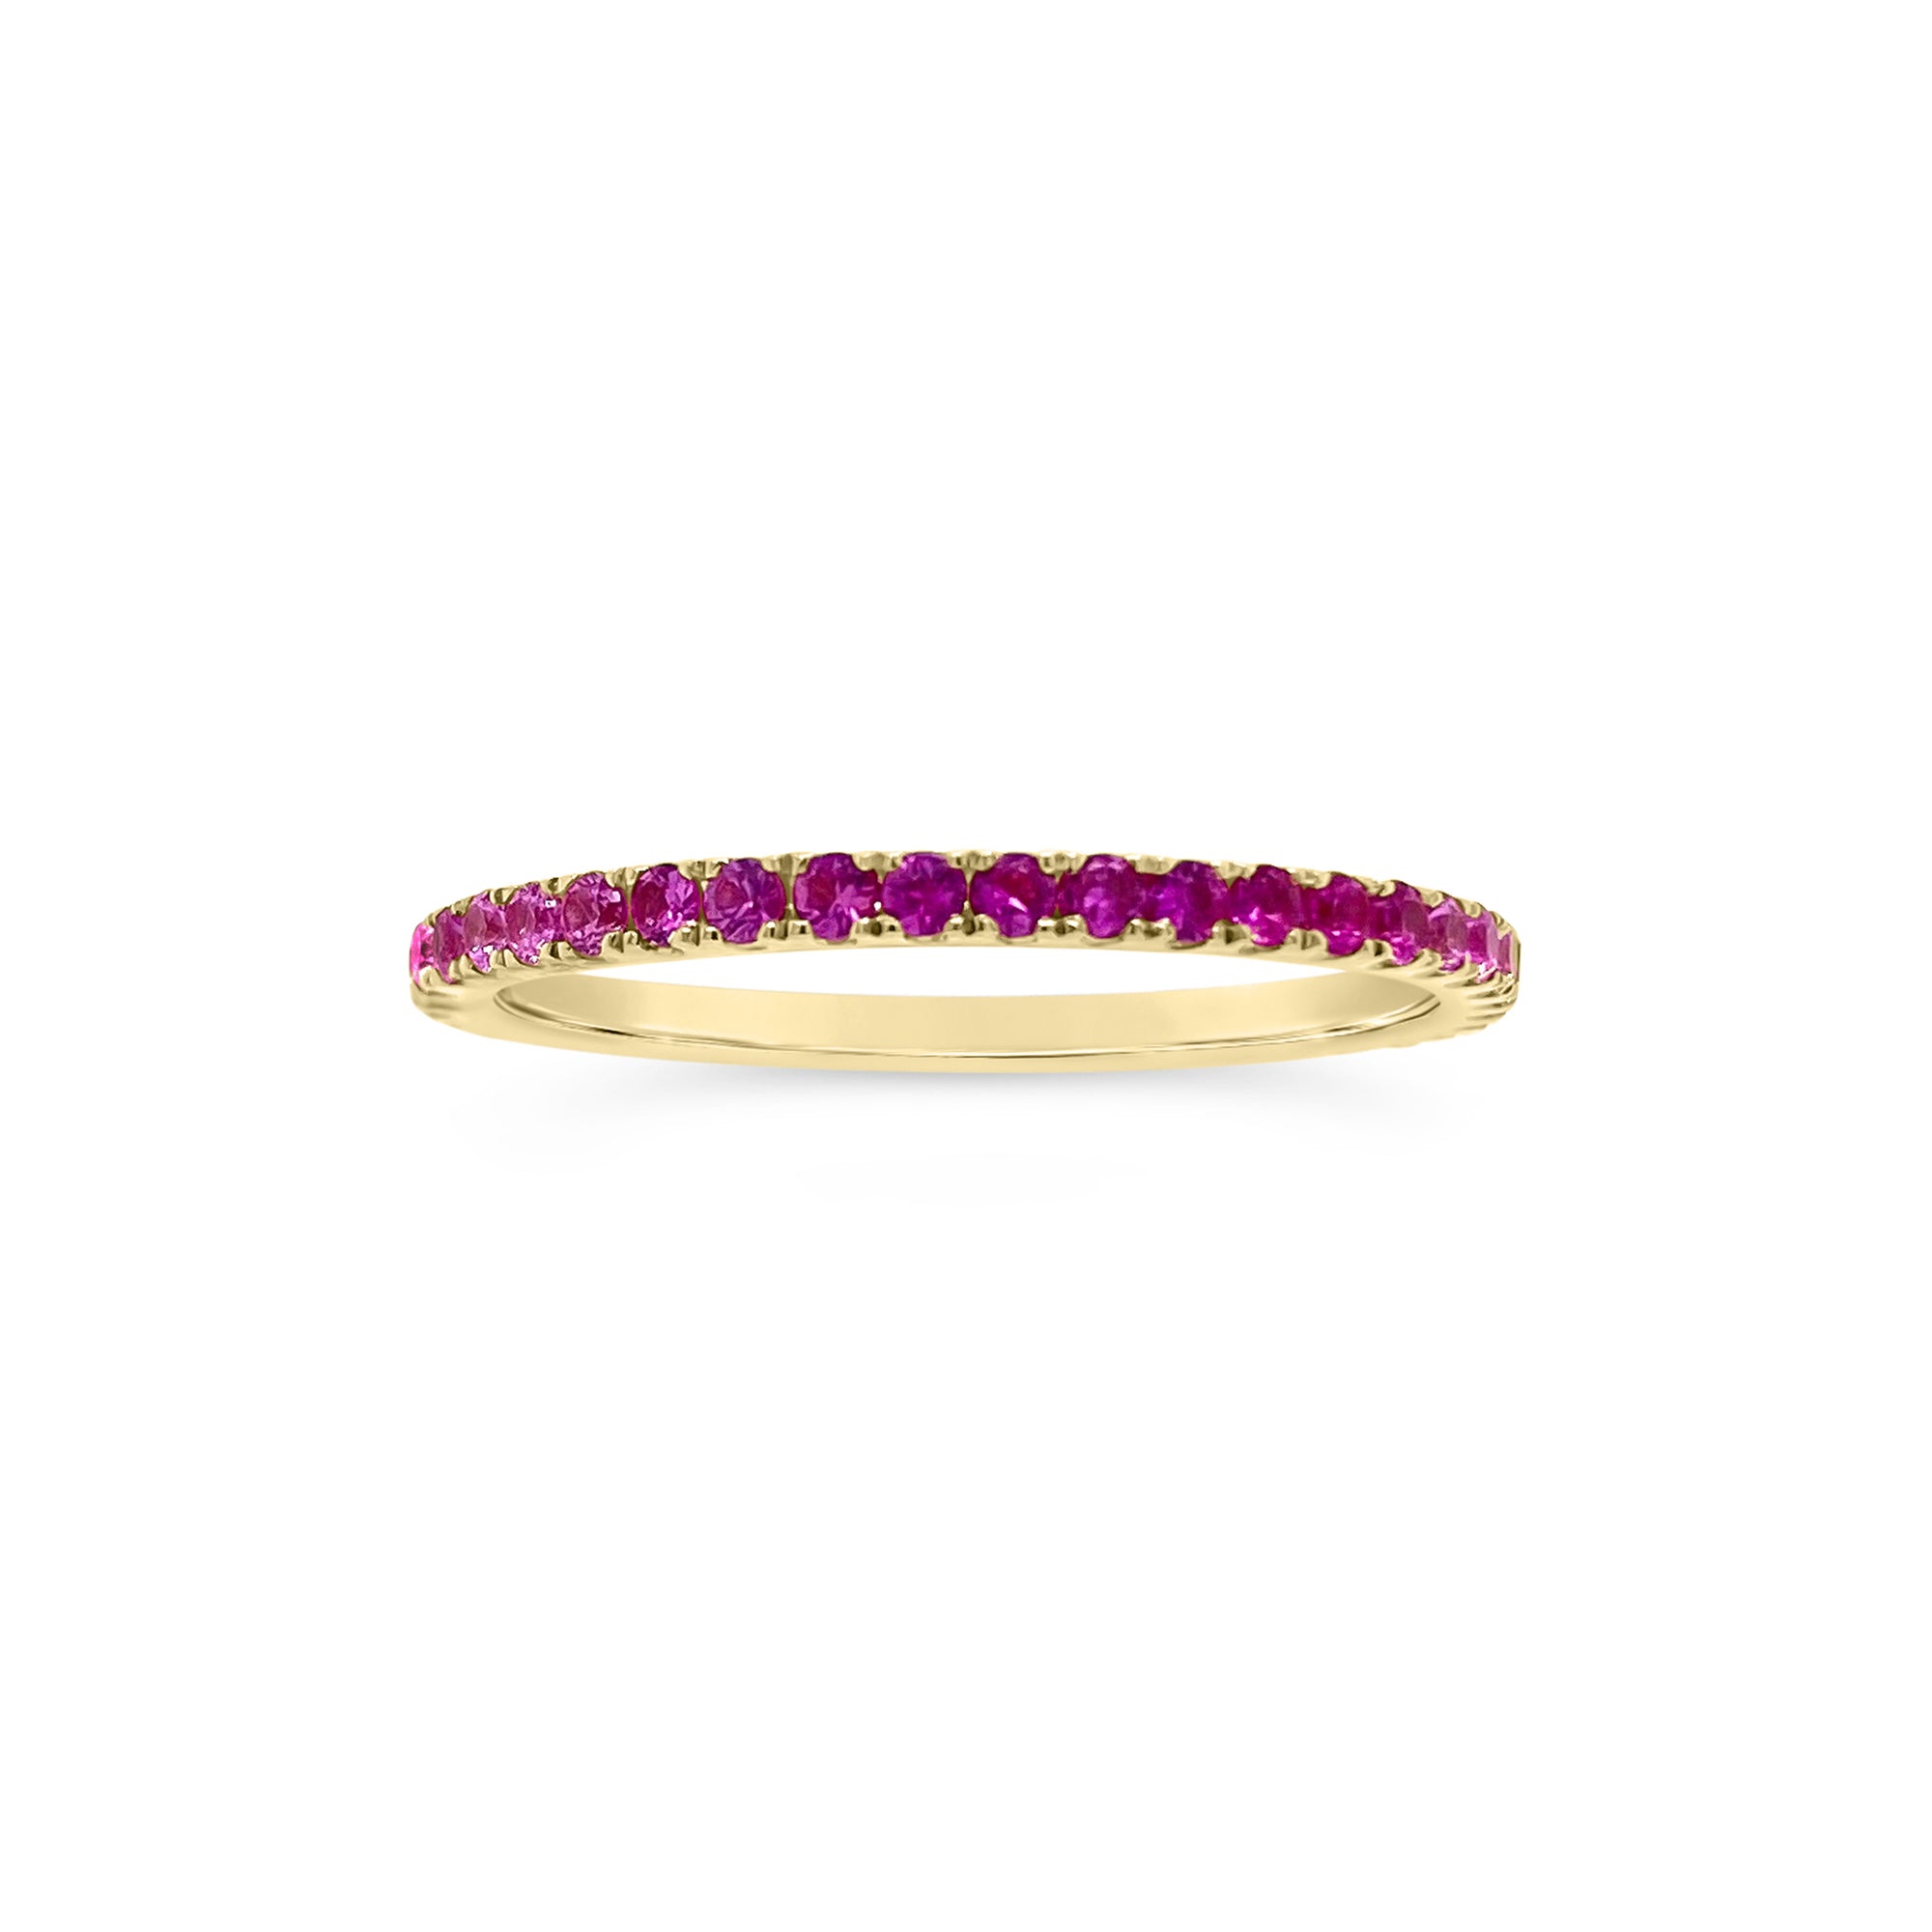 Diamond And Pink Sapphire 18k White Gold Eternity Wedding Band Ring